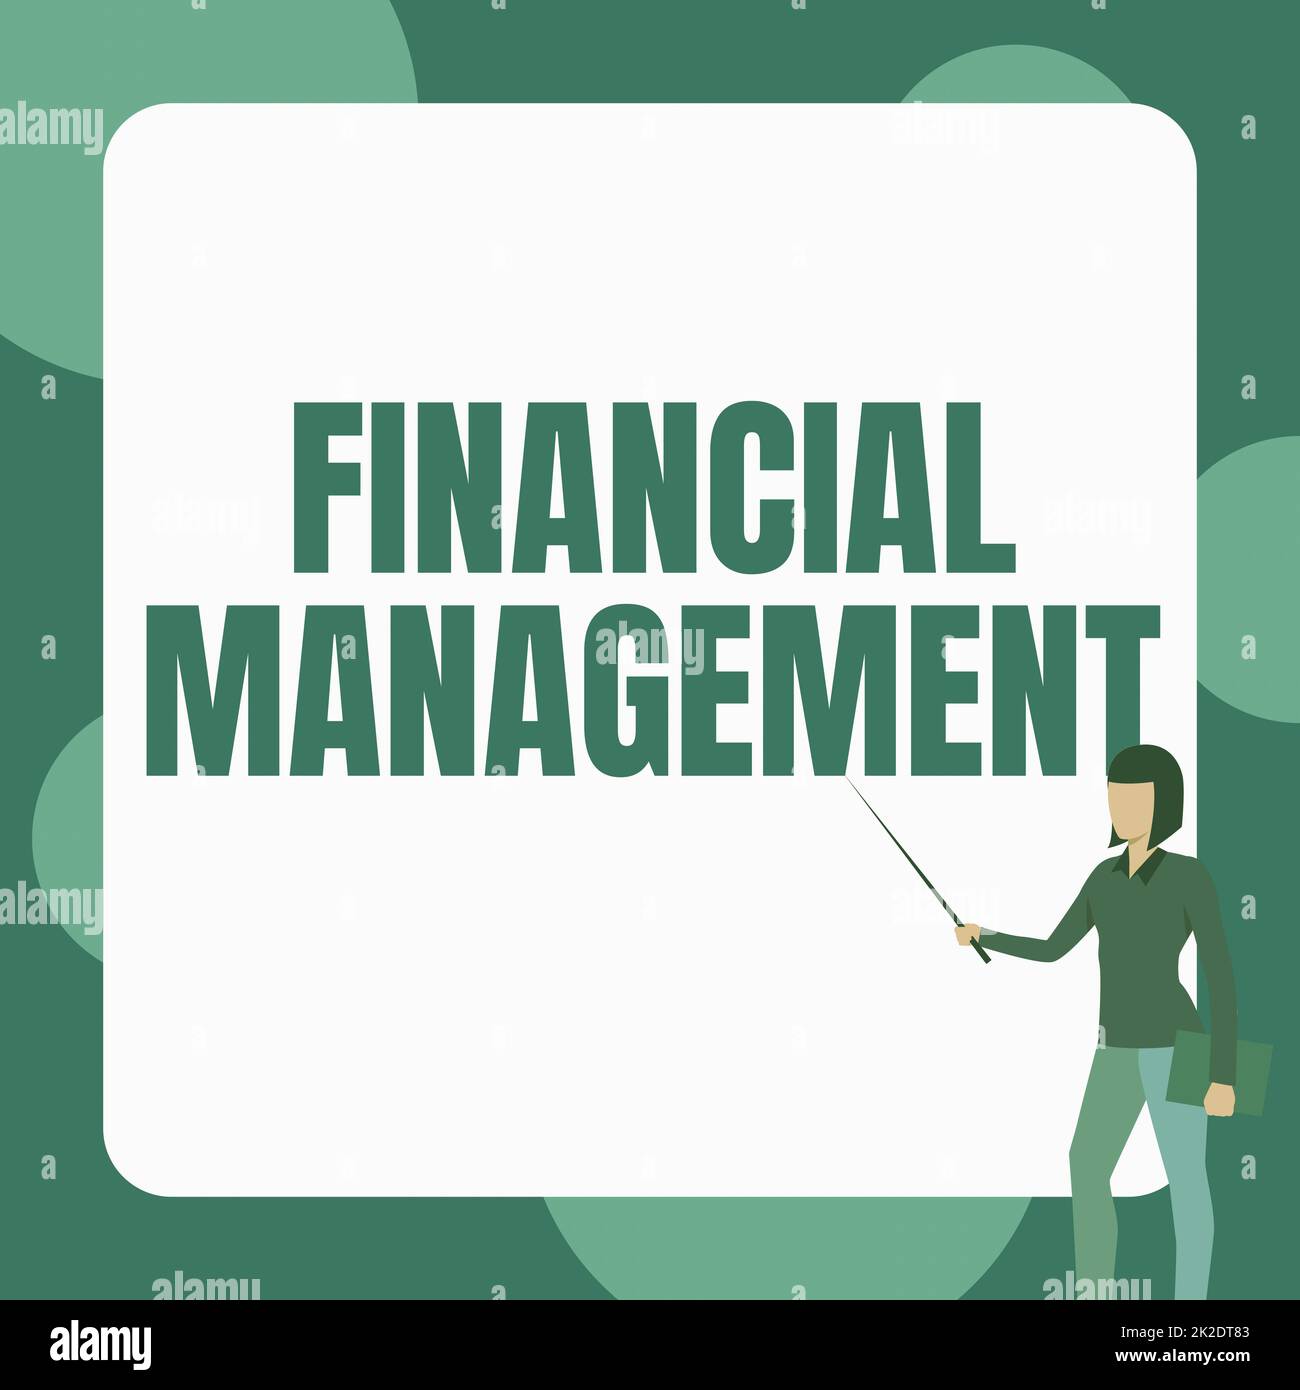 Conceptual caption Financial Management. Concept meaning efficient and effective way to Manage Money and Funds Lady Standing Holding Notebook While Pointing Stick In Blank Whiteboard. Stock Photo